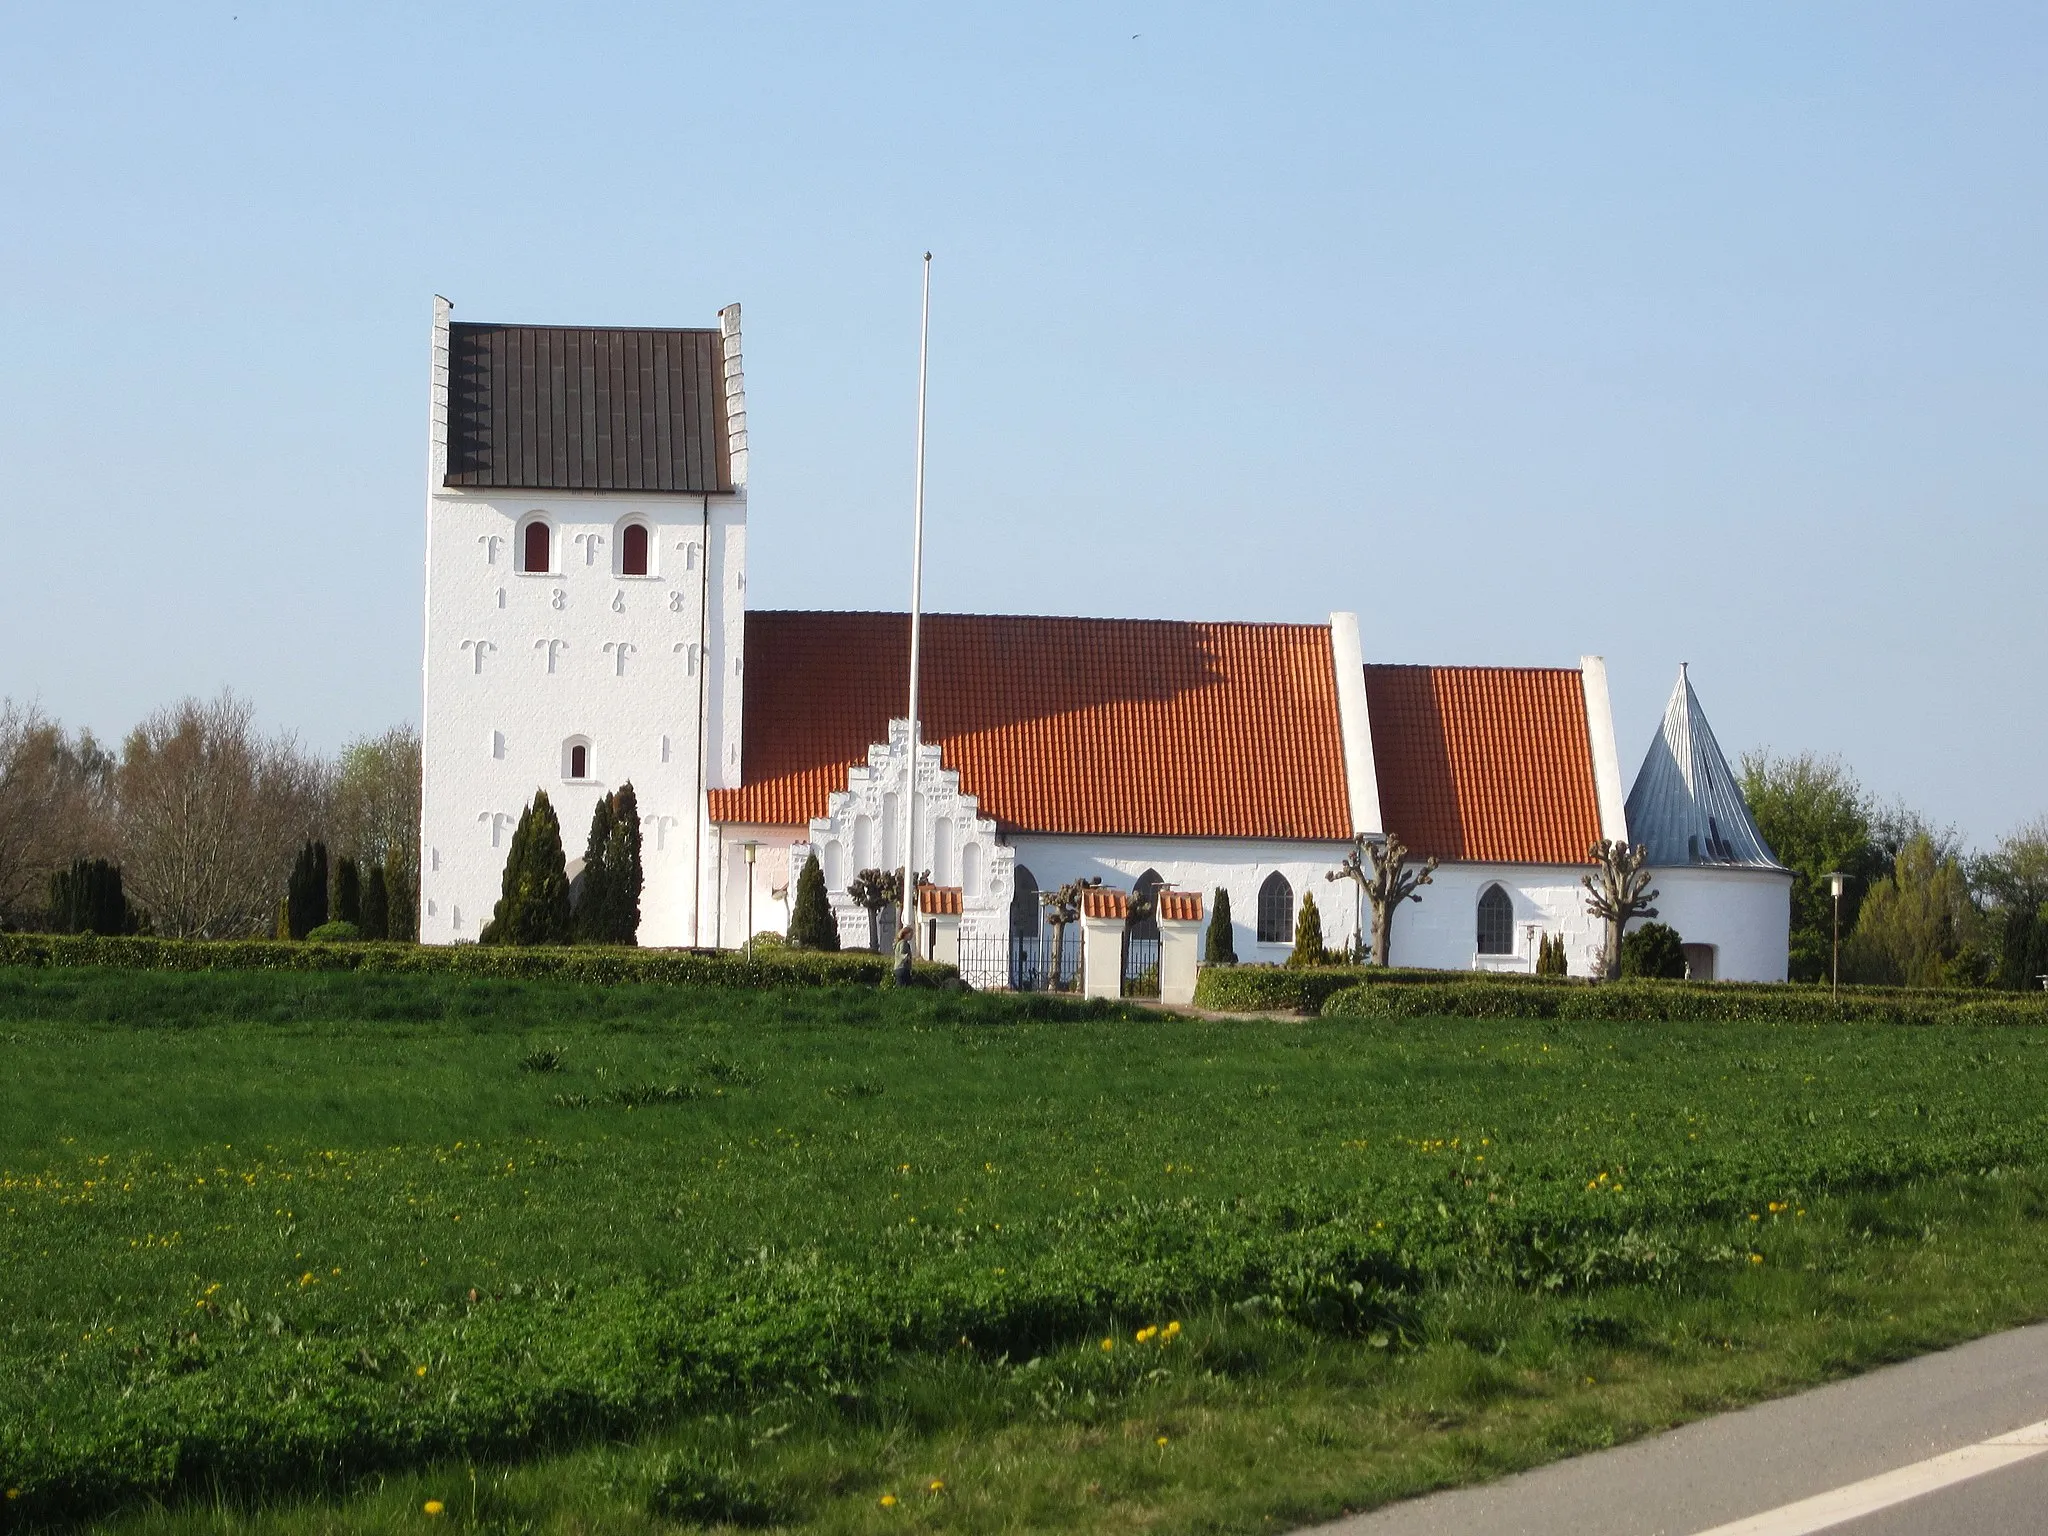 Photo showing: The church "Taulov Kirke" in Fredericia Kommune, South-Central Jutland, southern Denmark.